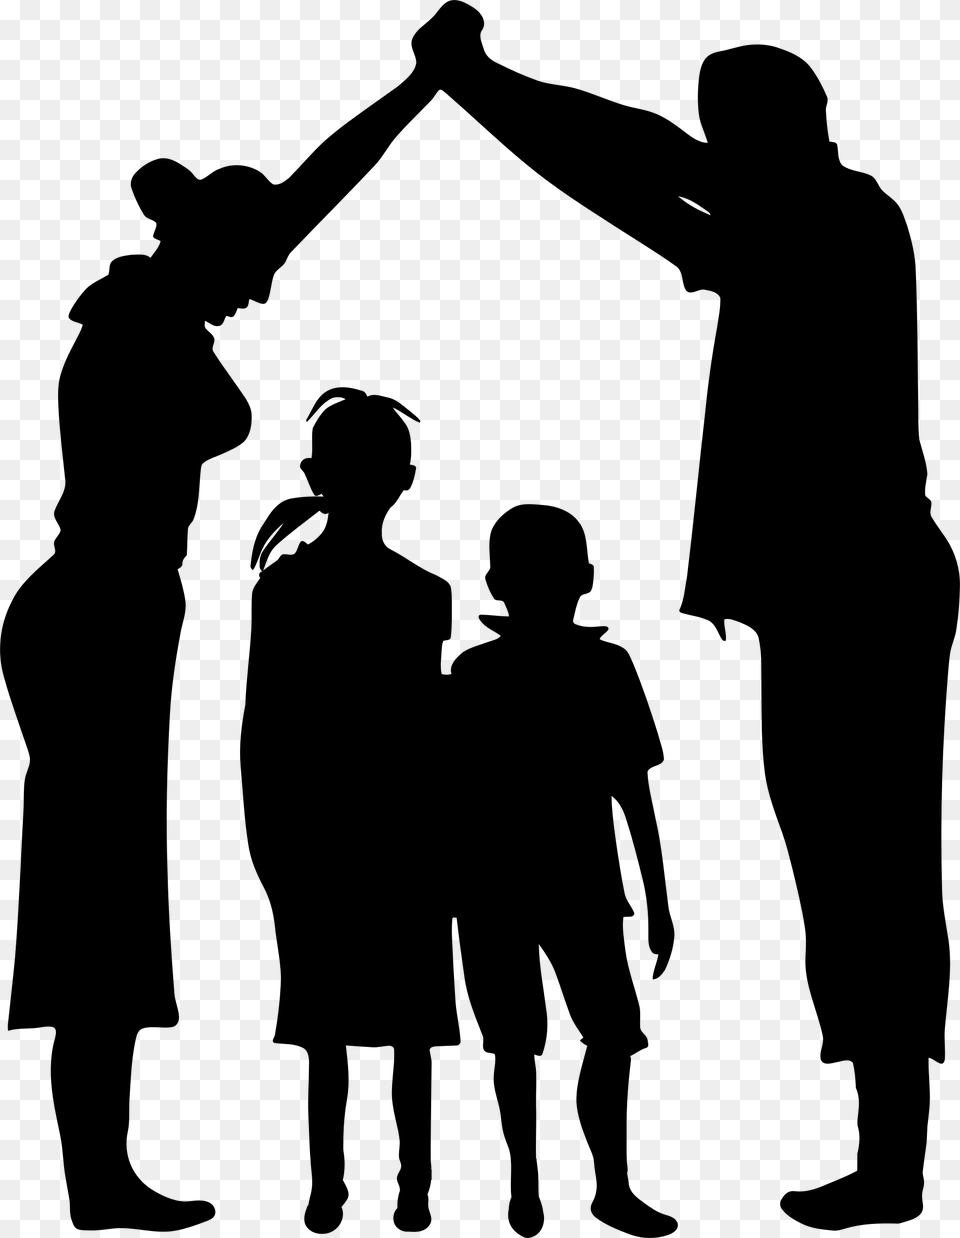 This Icons Design Of Family Shelter Minus, Gray Free Png